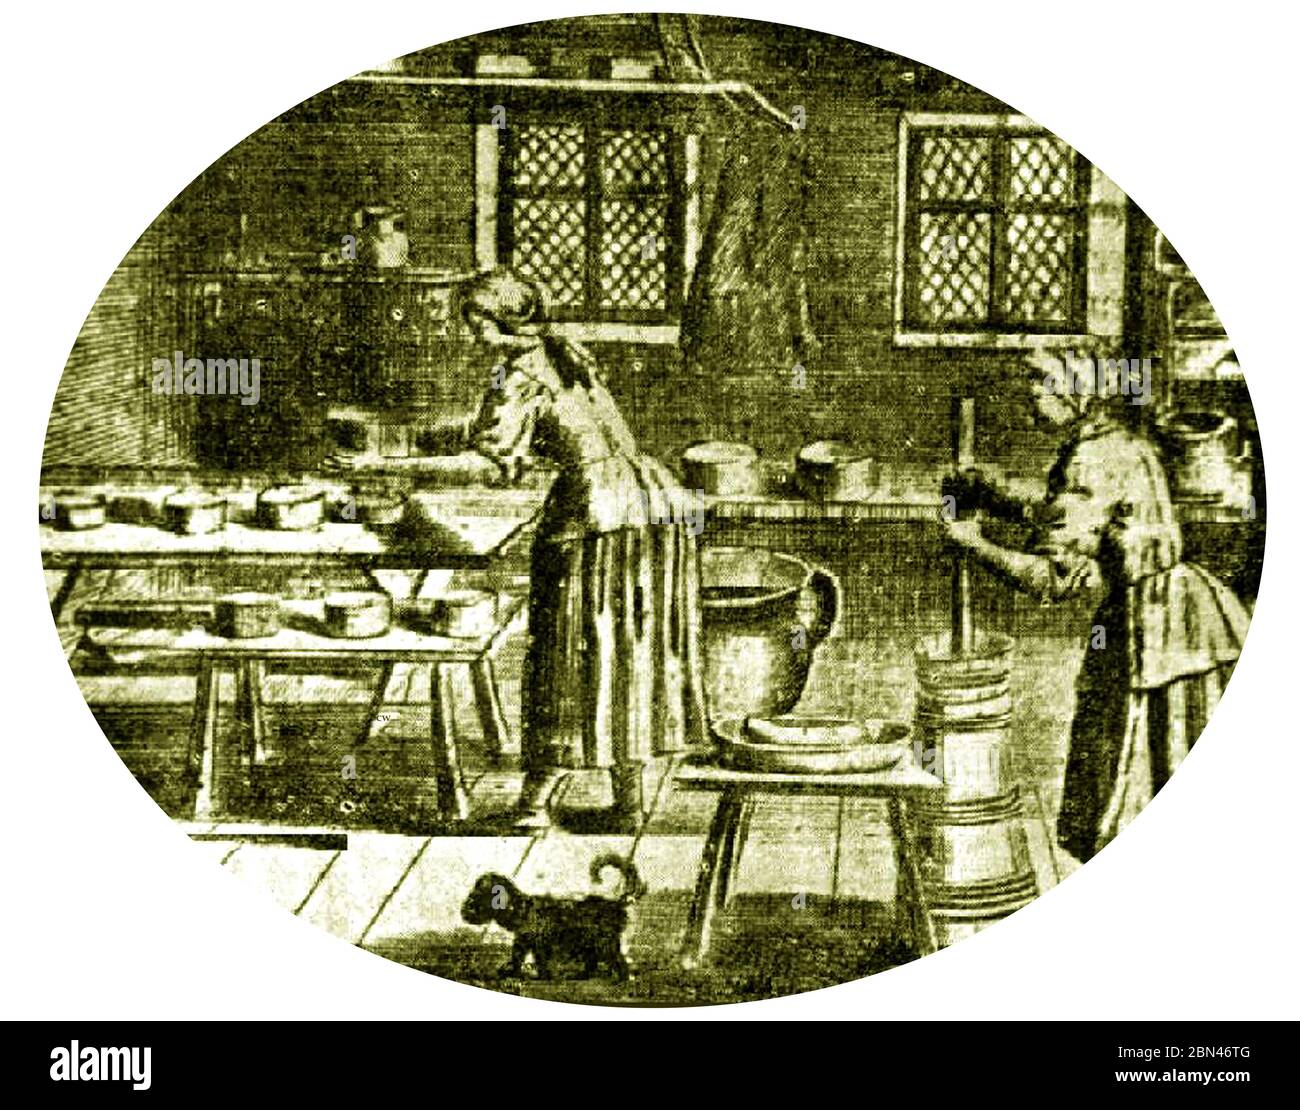 Dairy Industry in Britain - 18th century dairy engraving showing dairy maids churning butter and making cheese. A dog runs around the dairy floor indicating that this wasn't a cleanliness concern at the time. Stock Photo